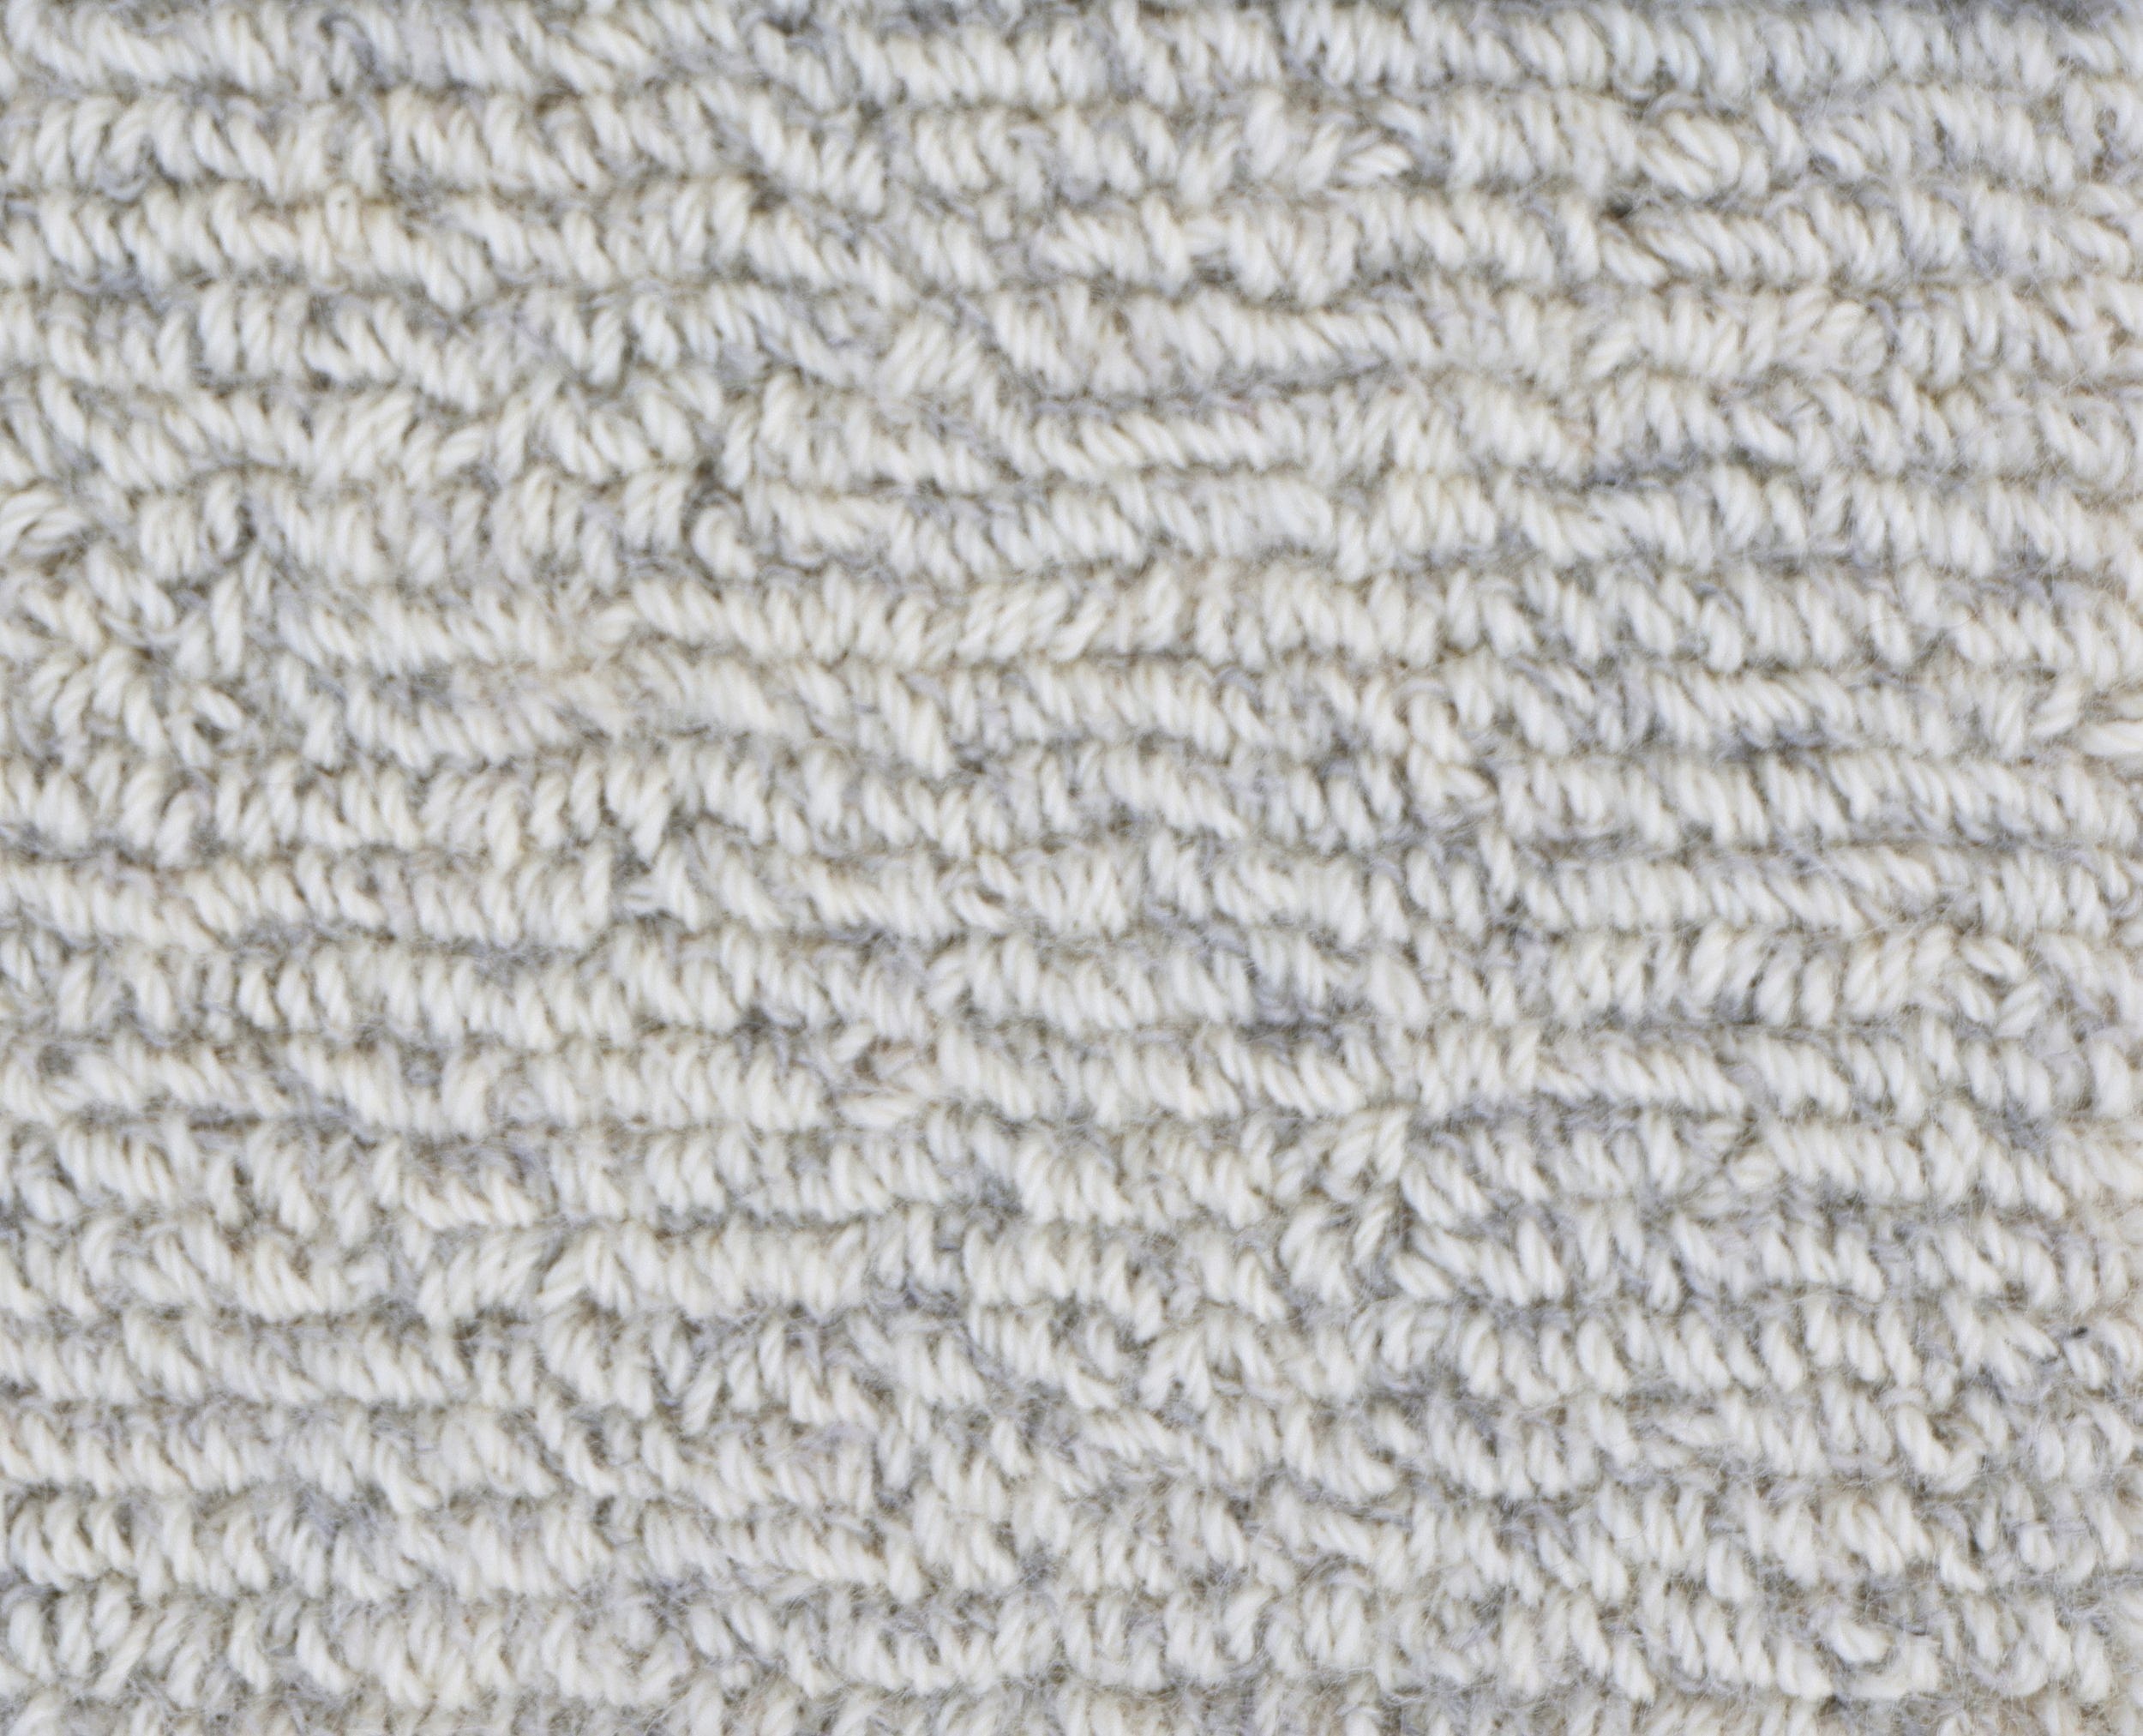 Design Eebri offwhite/natural grey cabled